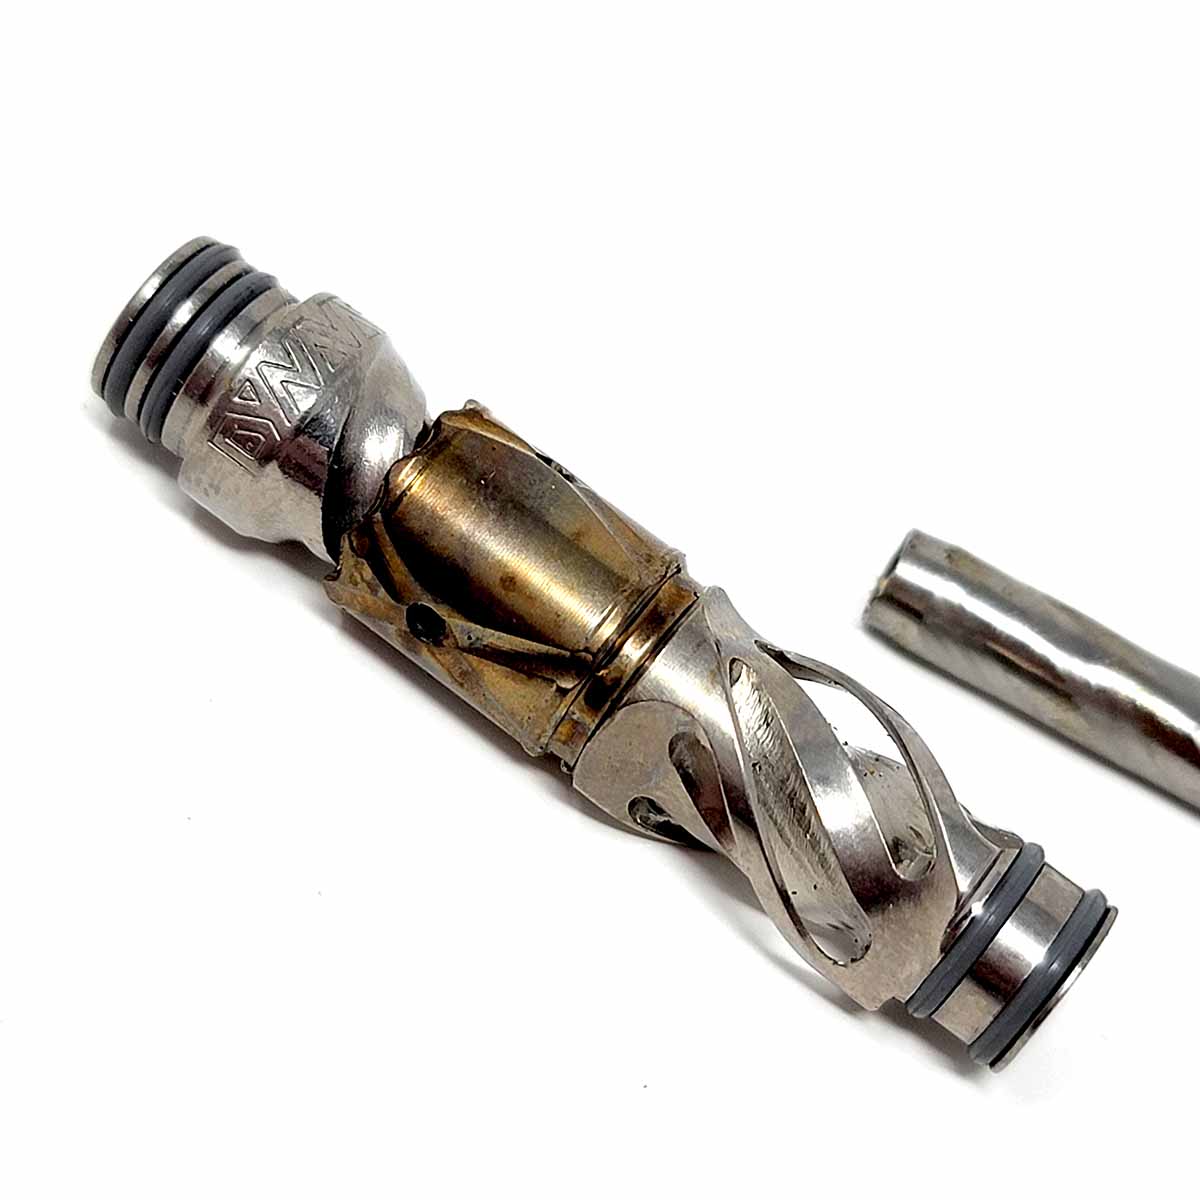 Woodwynd Helix Mouthpiece pushes the Dynavap CCD Screen back into full-bowl setting